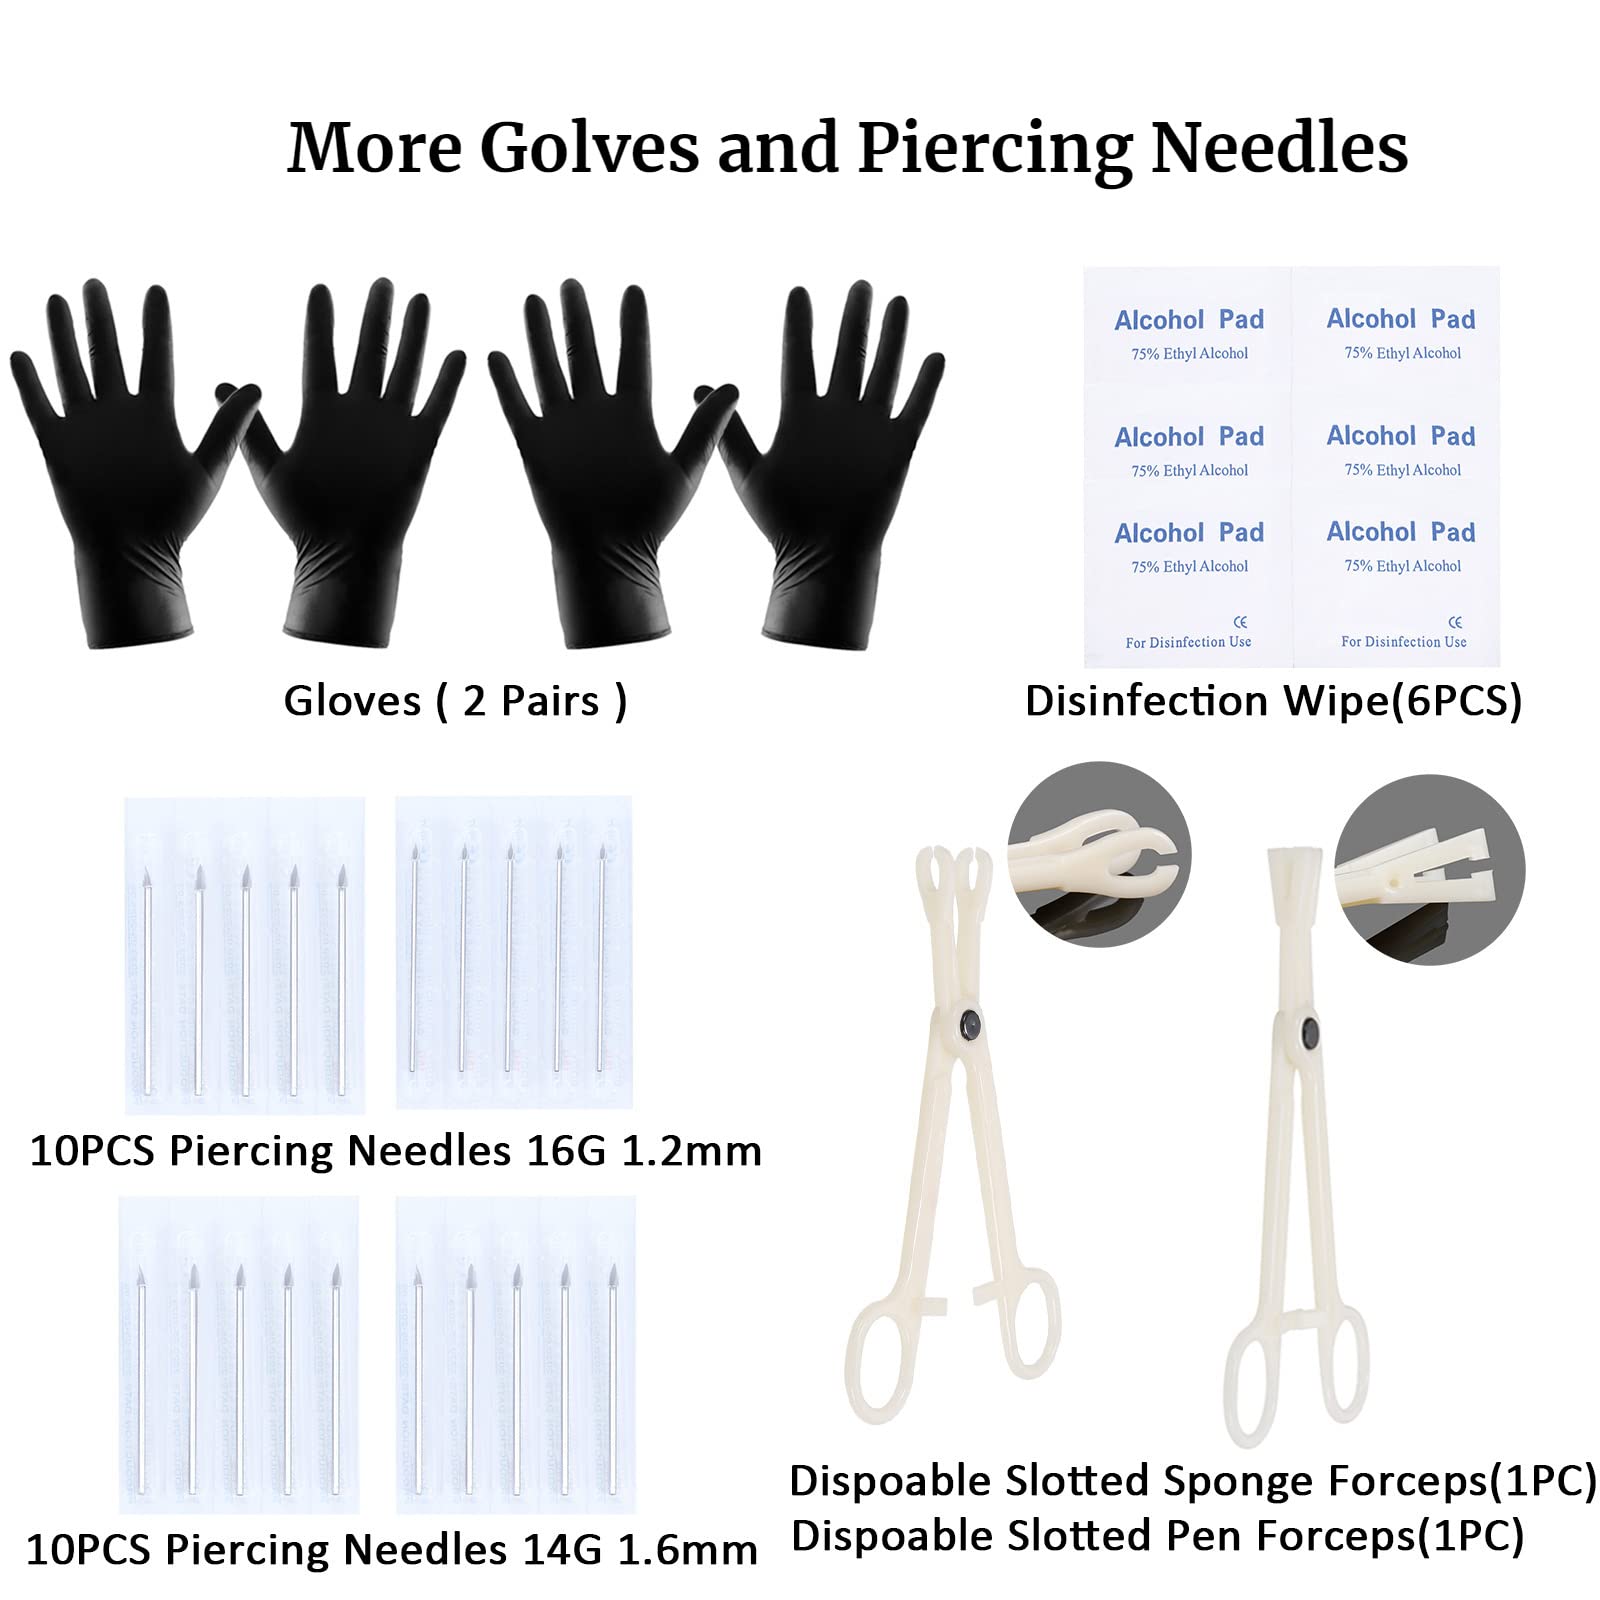 58PCS Body Piercing Kit Surgical Steel 14G 16G BCR CBR Labret Lip Rings Cartilage Daith Earrings Belly Button Rings Nose Septum Piercing Jewelry Needles Gloves Clamps Tools